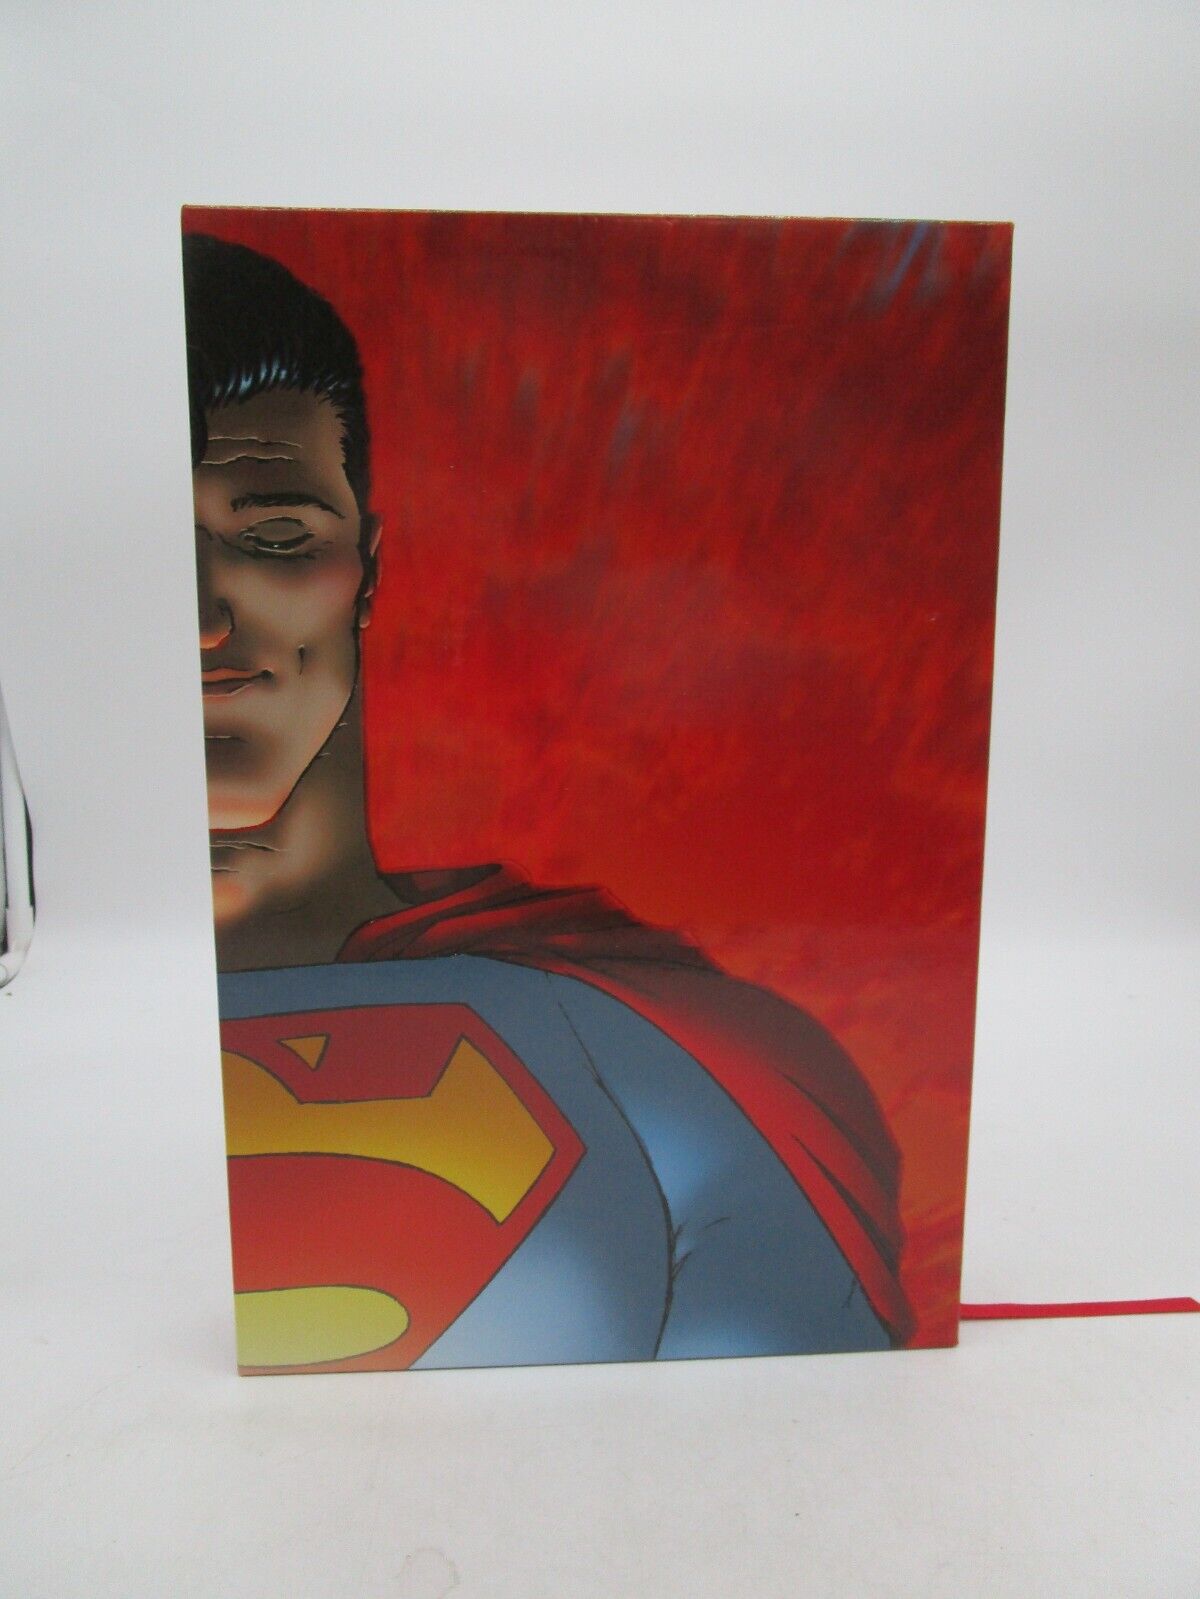 2010 DC Comics Hardcover Graphic Novel *ABSOLUTE ALL-STAR SUPERMAN* G. Morrison